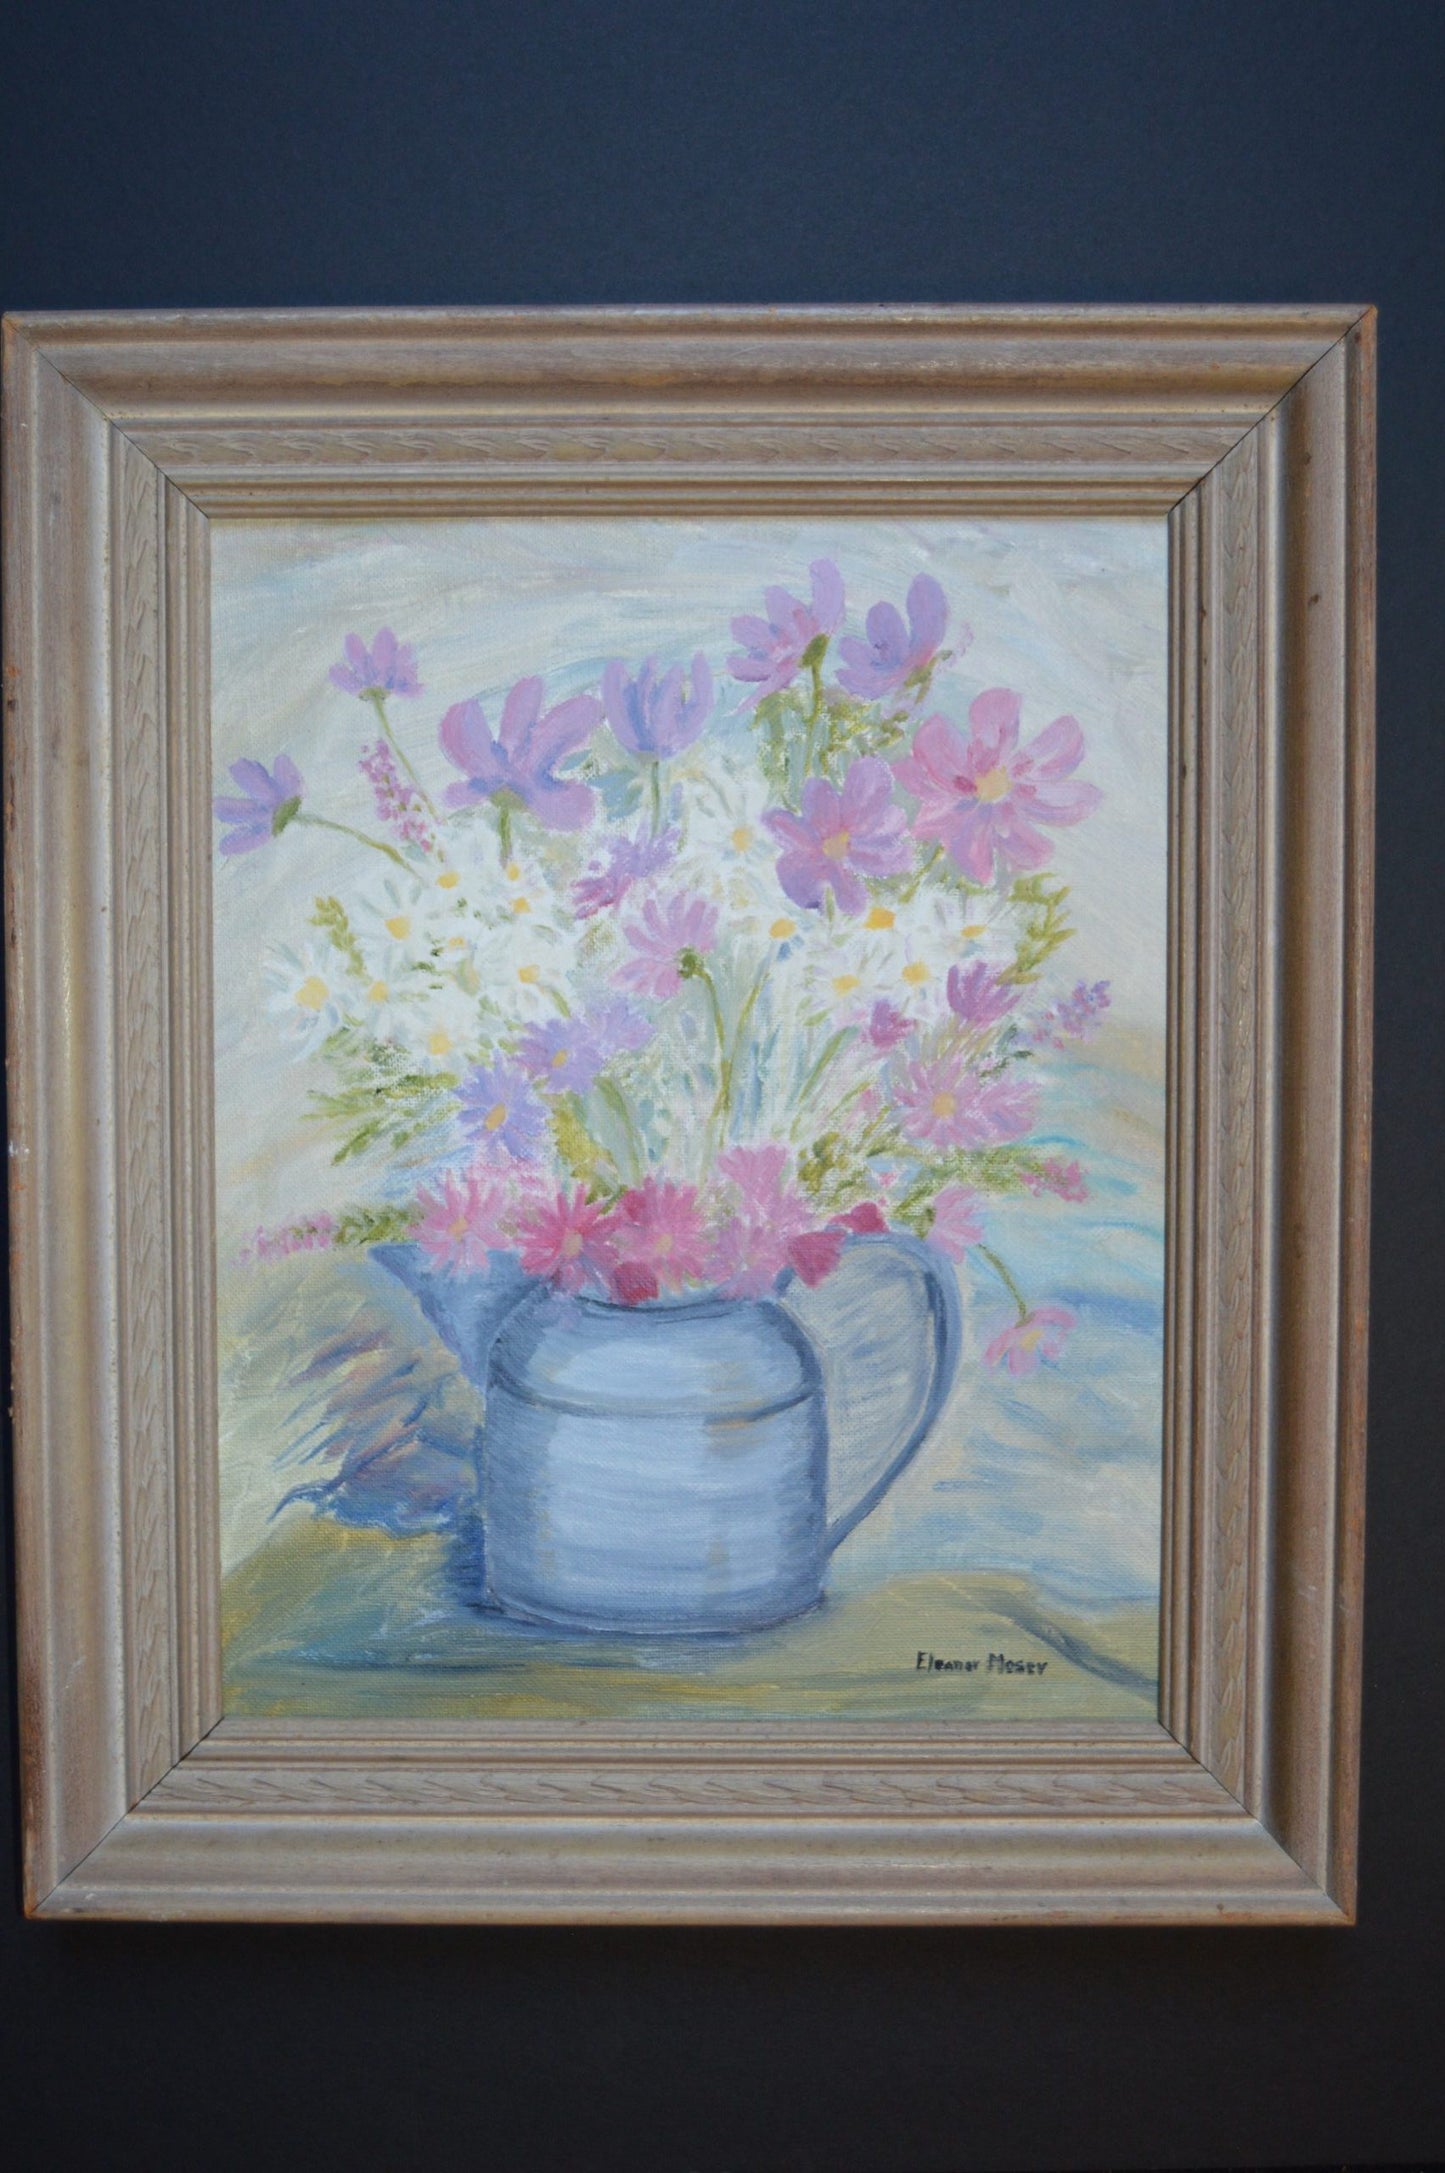 Floral Teapot by Eleanor Moser